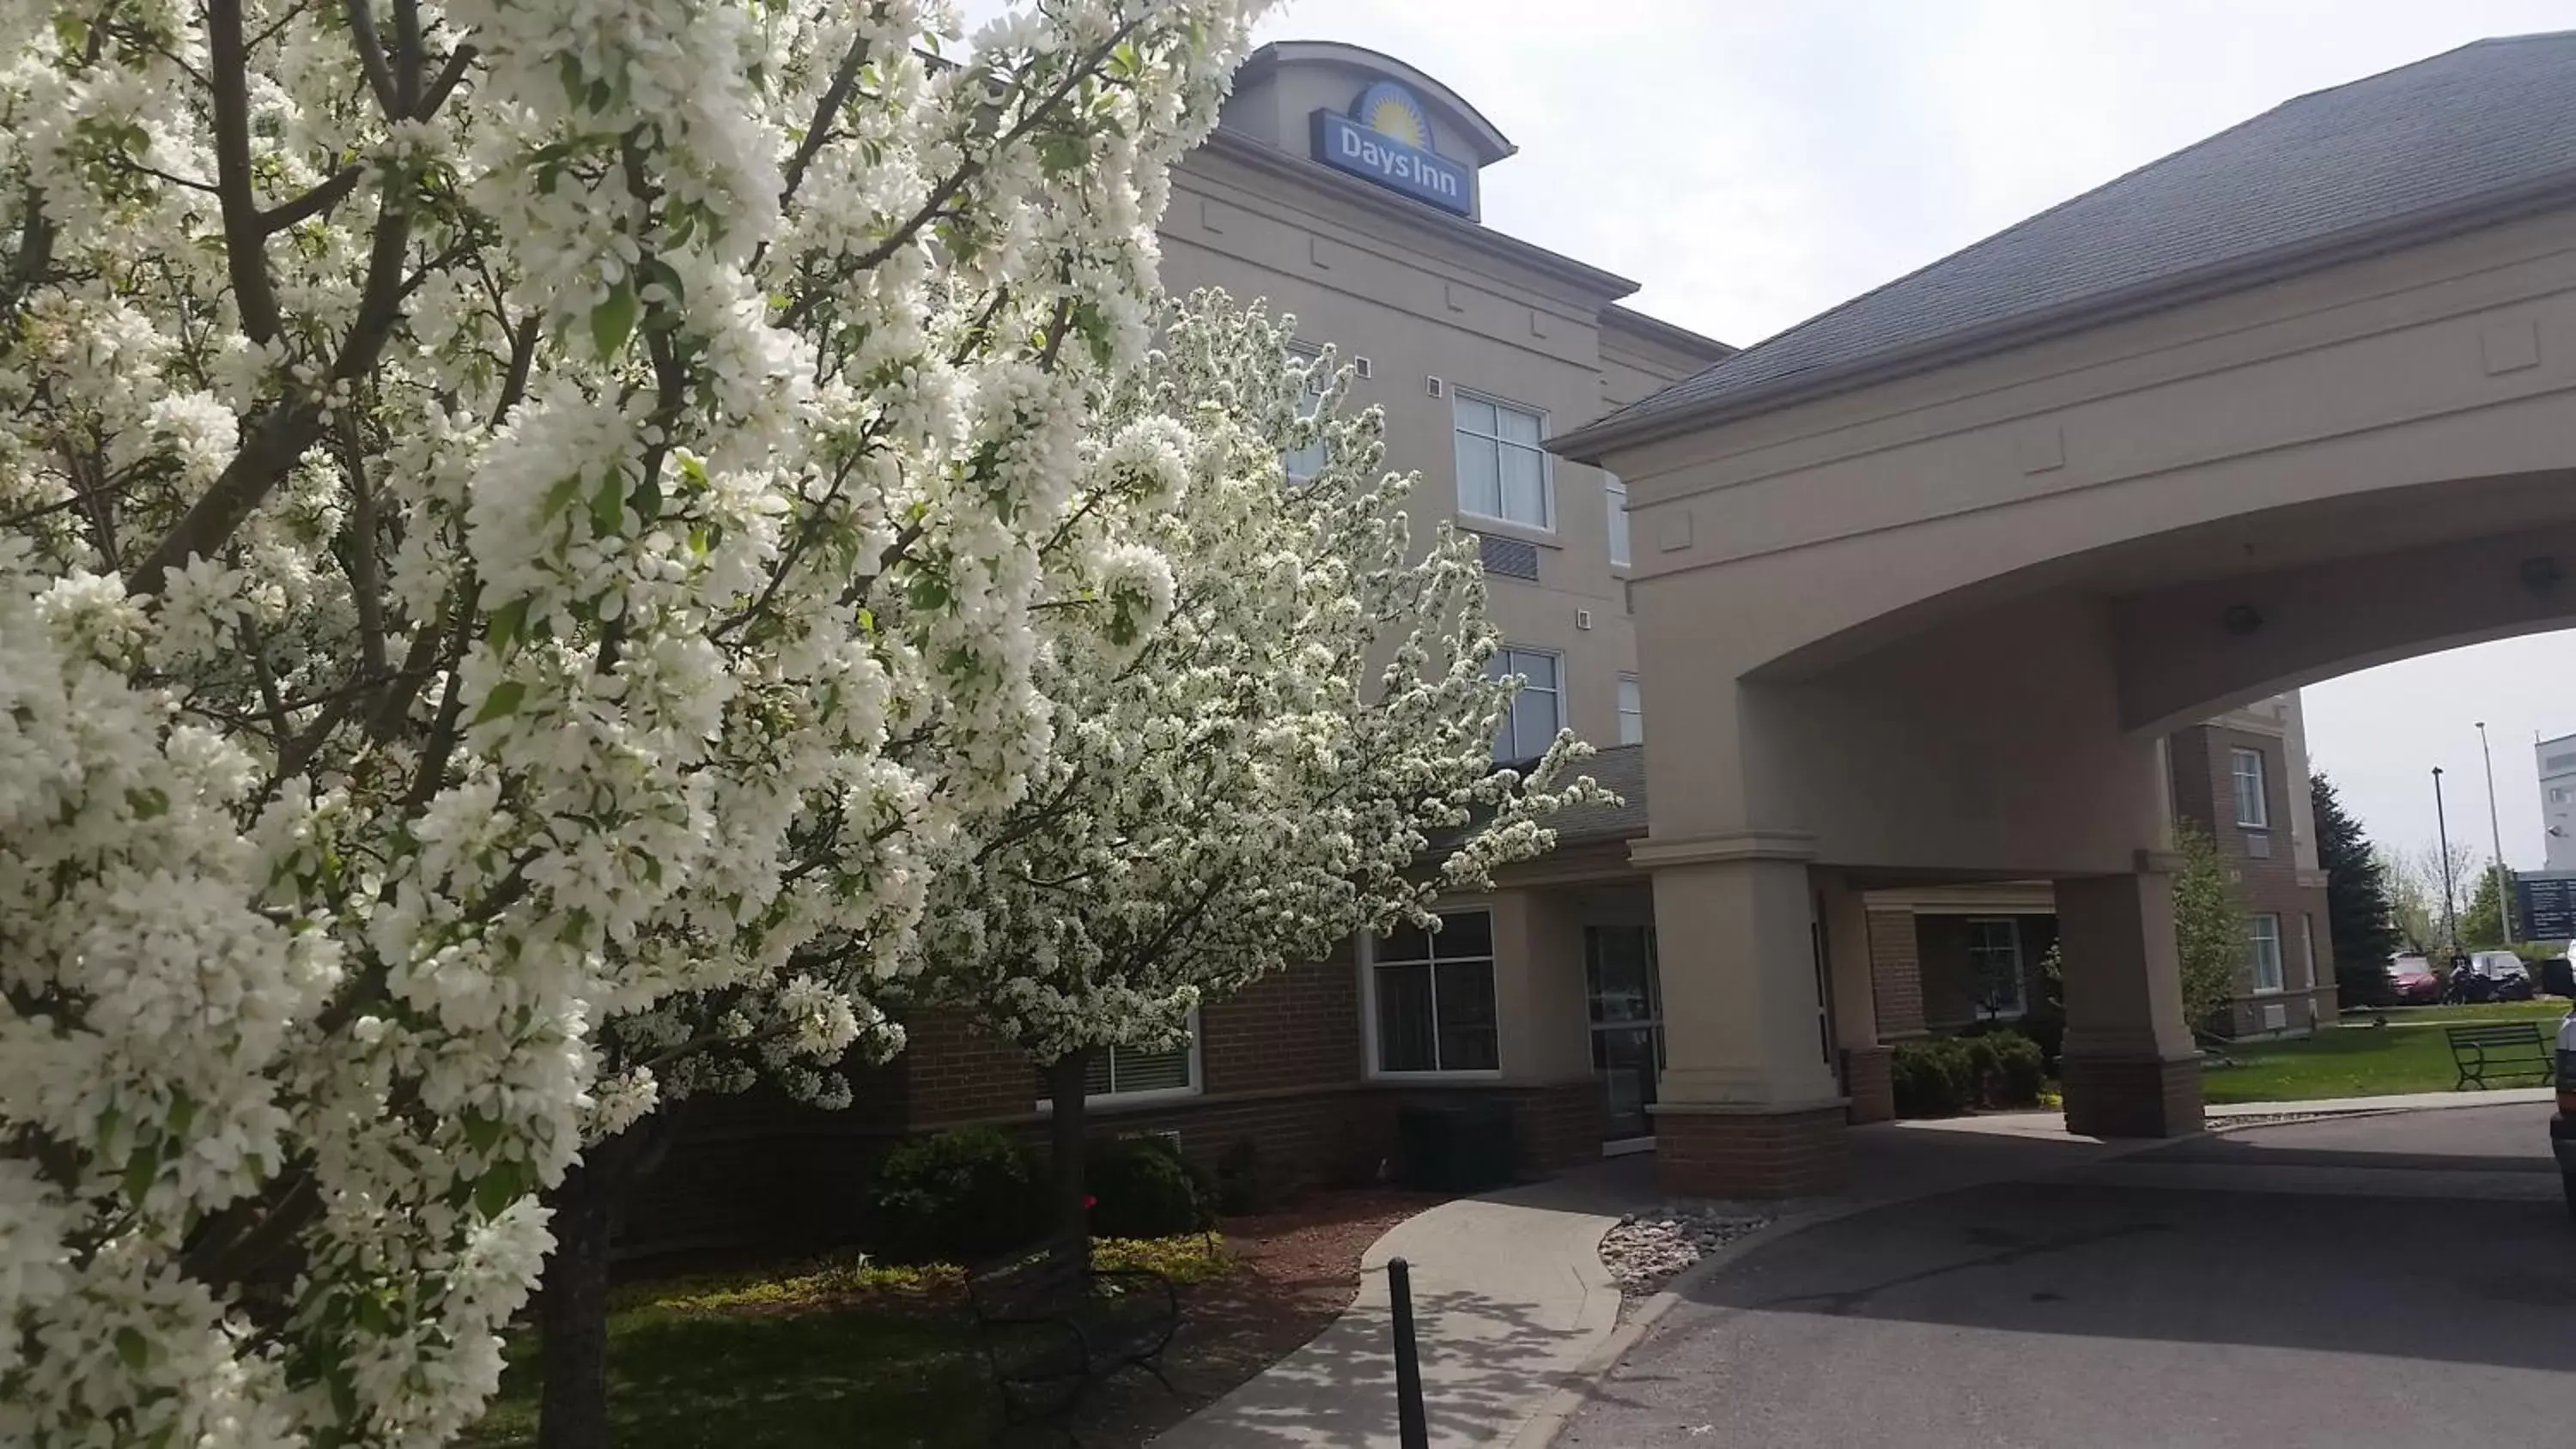 Property building, Patio/Outdoor Area in Days Inn by Wyndham Ottawa Airport